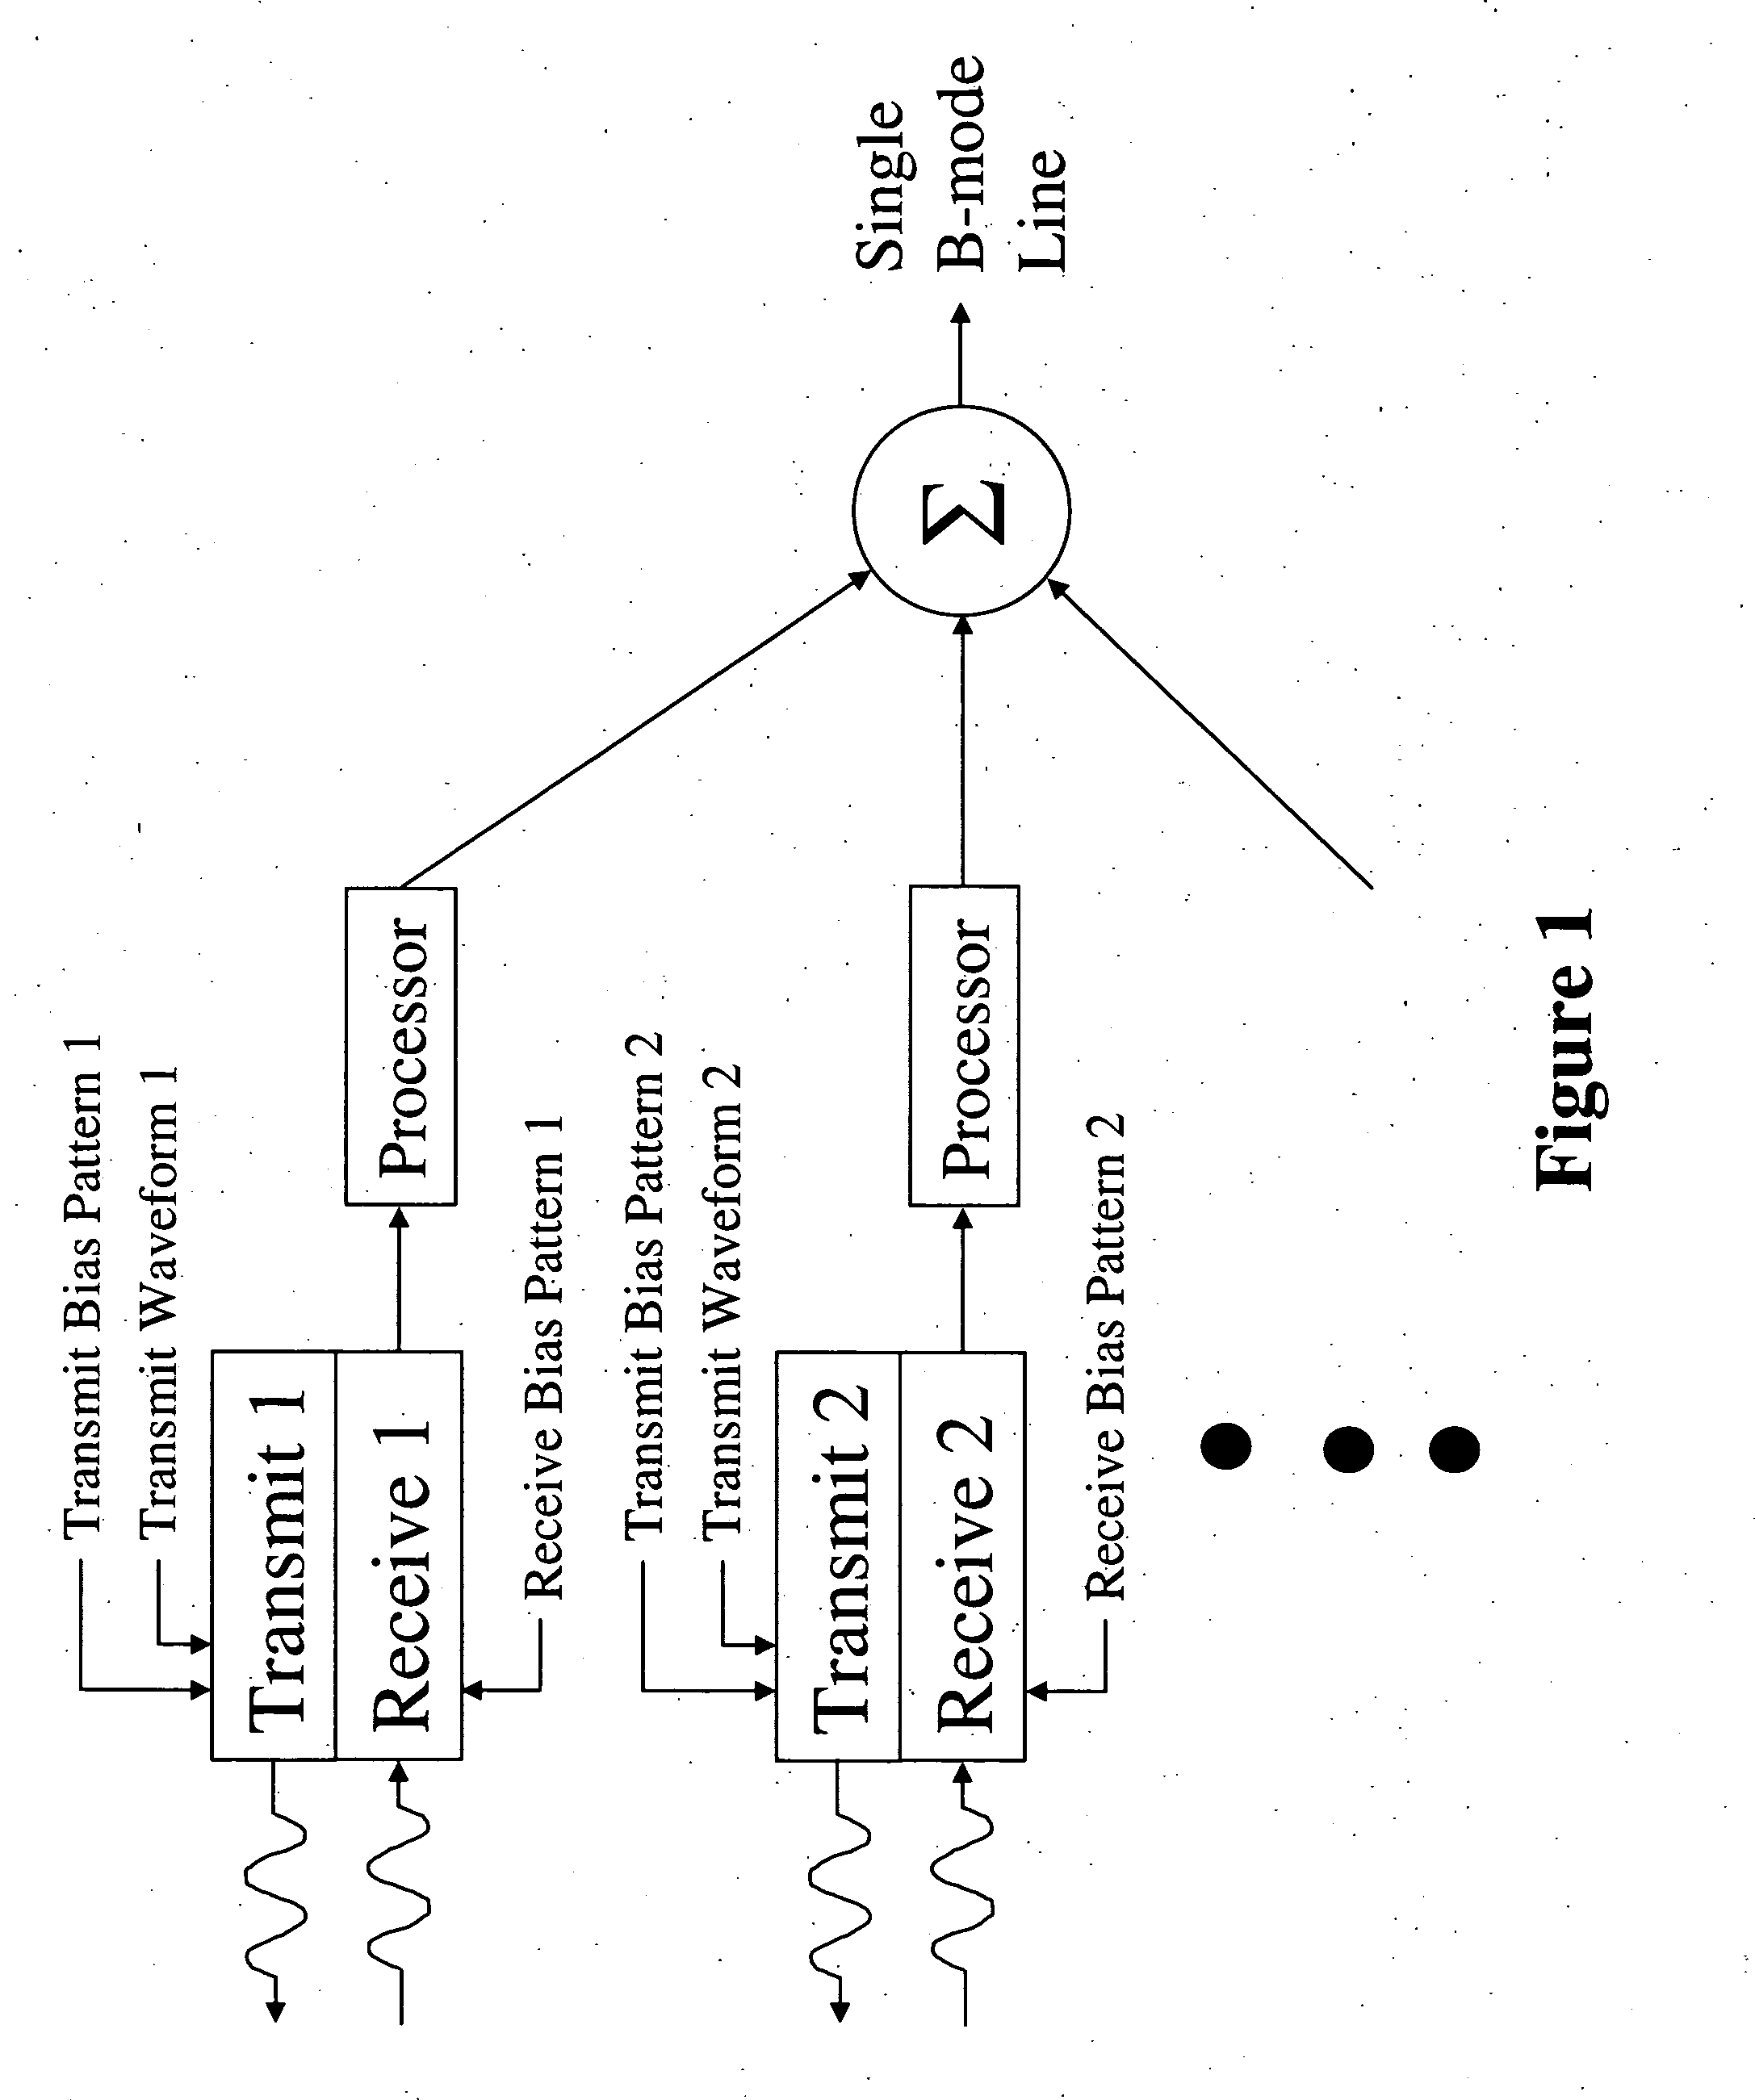 Method and apparatus for improving the performance of capacitive acoustic transducers using bias polarity control and multiple firings